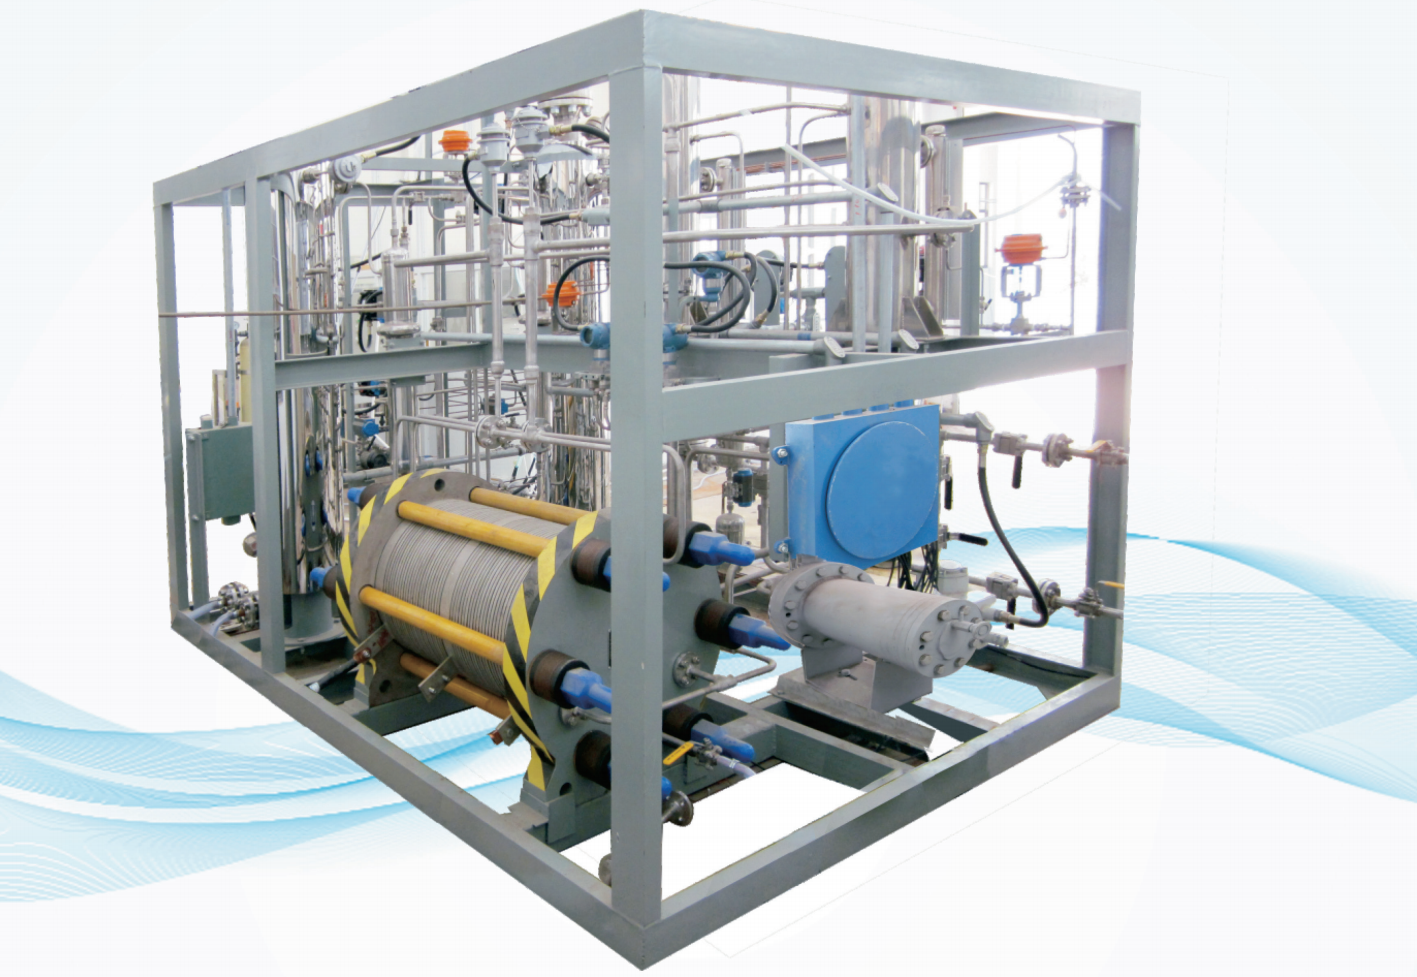 Integrated unit for producing and drying hydrogen